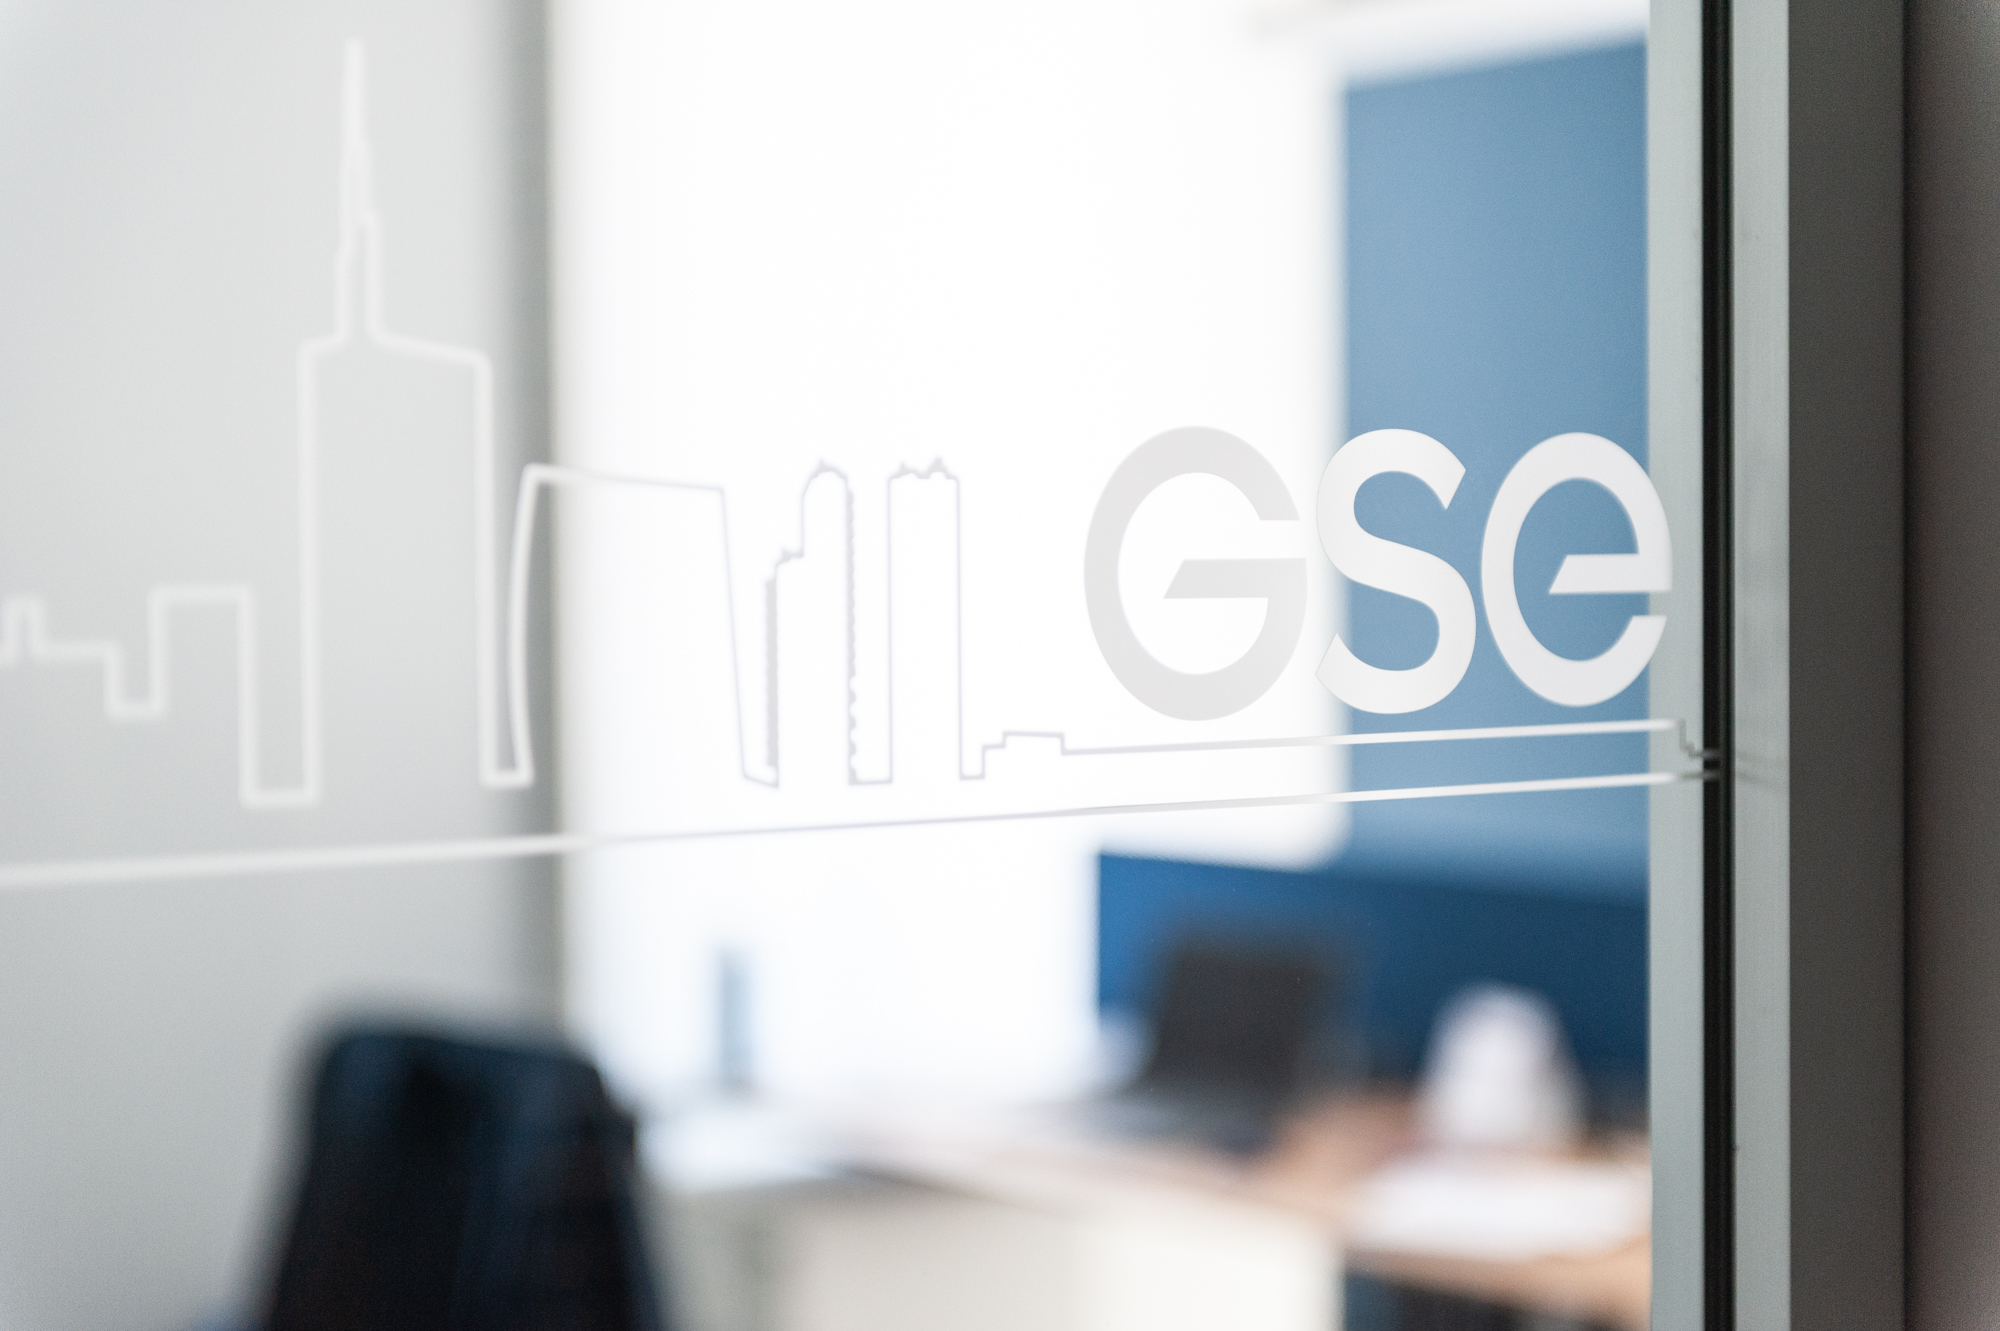 AN EXCELLENT 2022 FOR GSE ITALIA: TURNOVER UP 111% FOR THE GROUP’S ITALIAN SUBSIDIARY